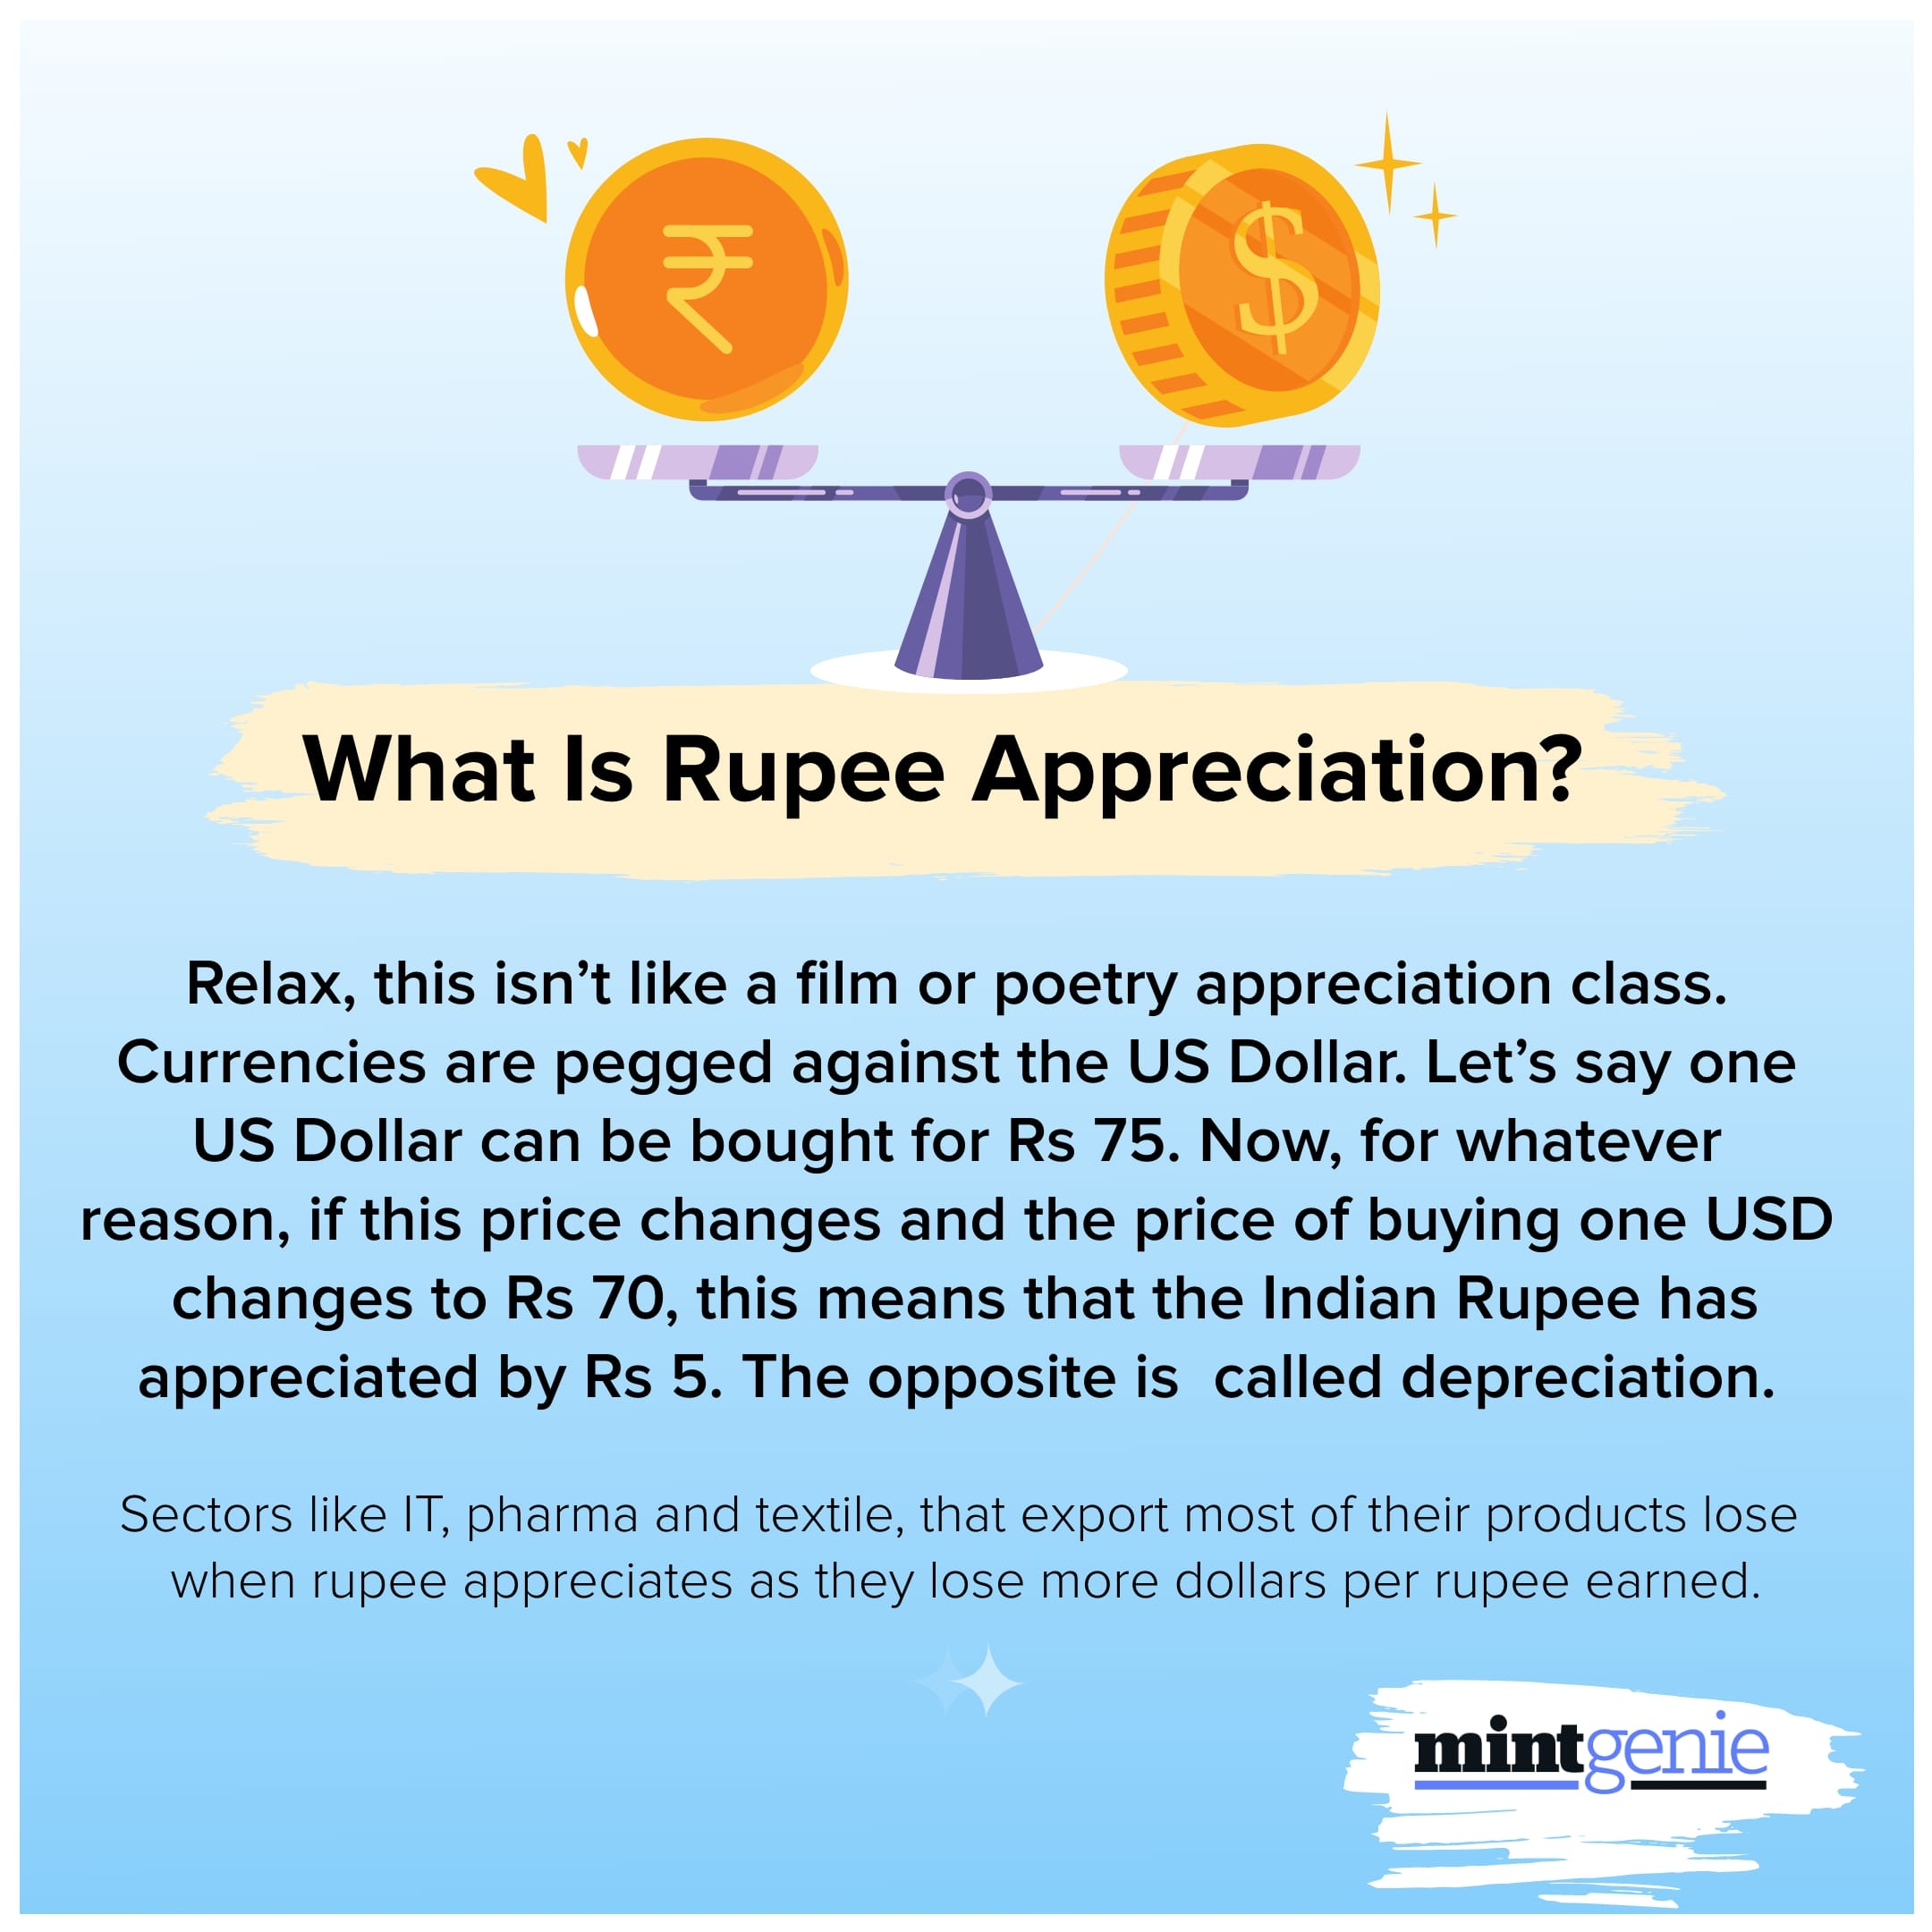 What is rupee appreciation?